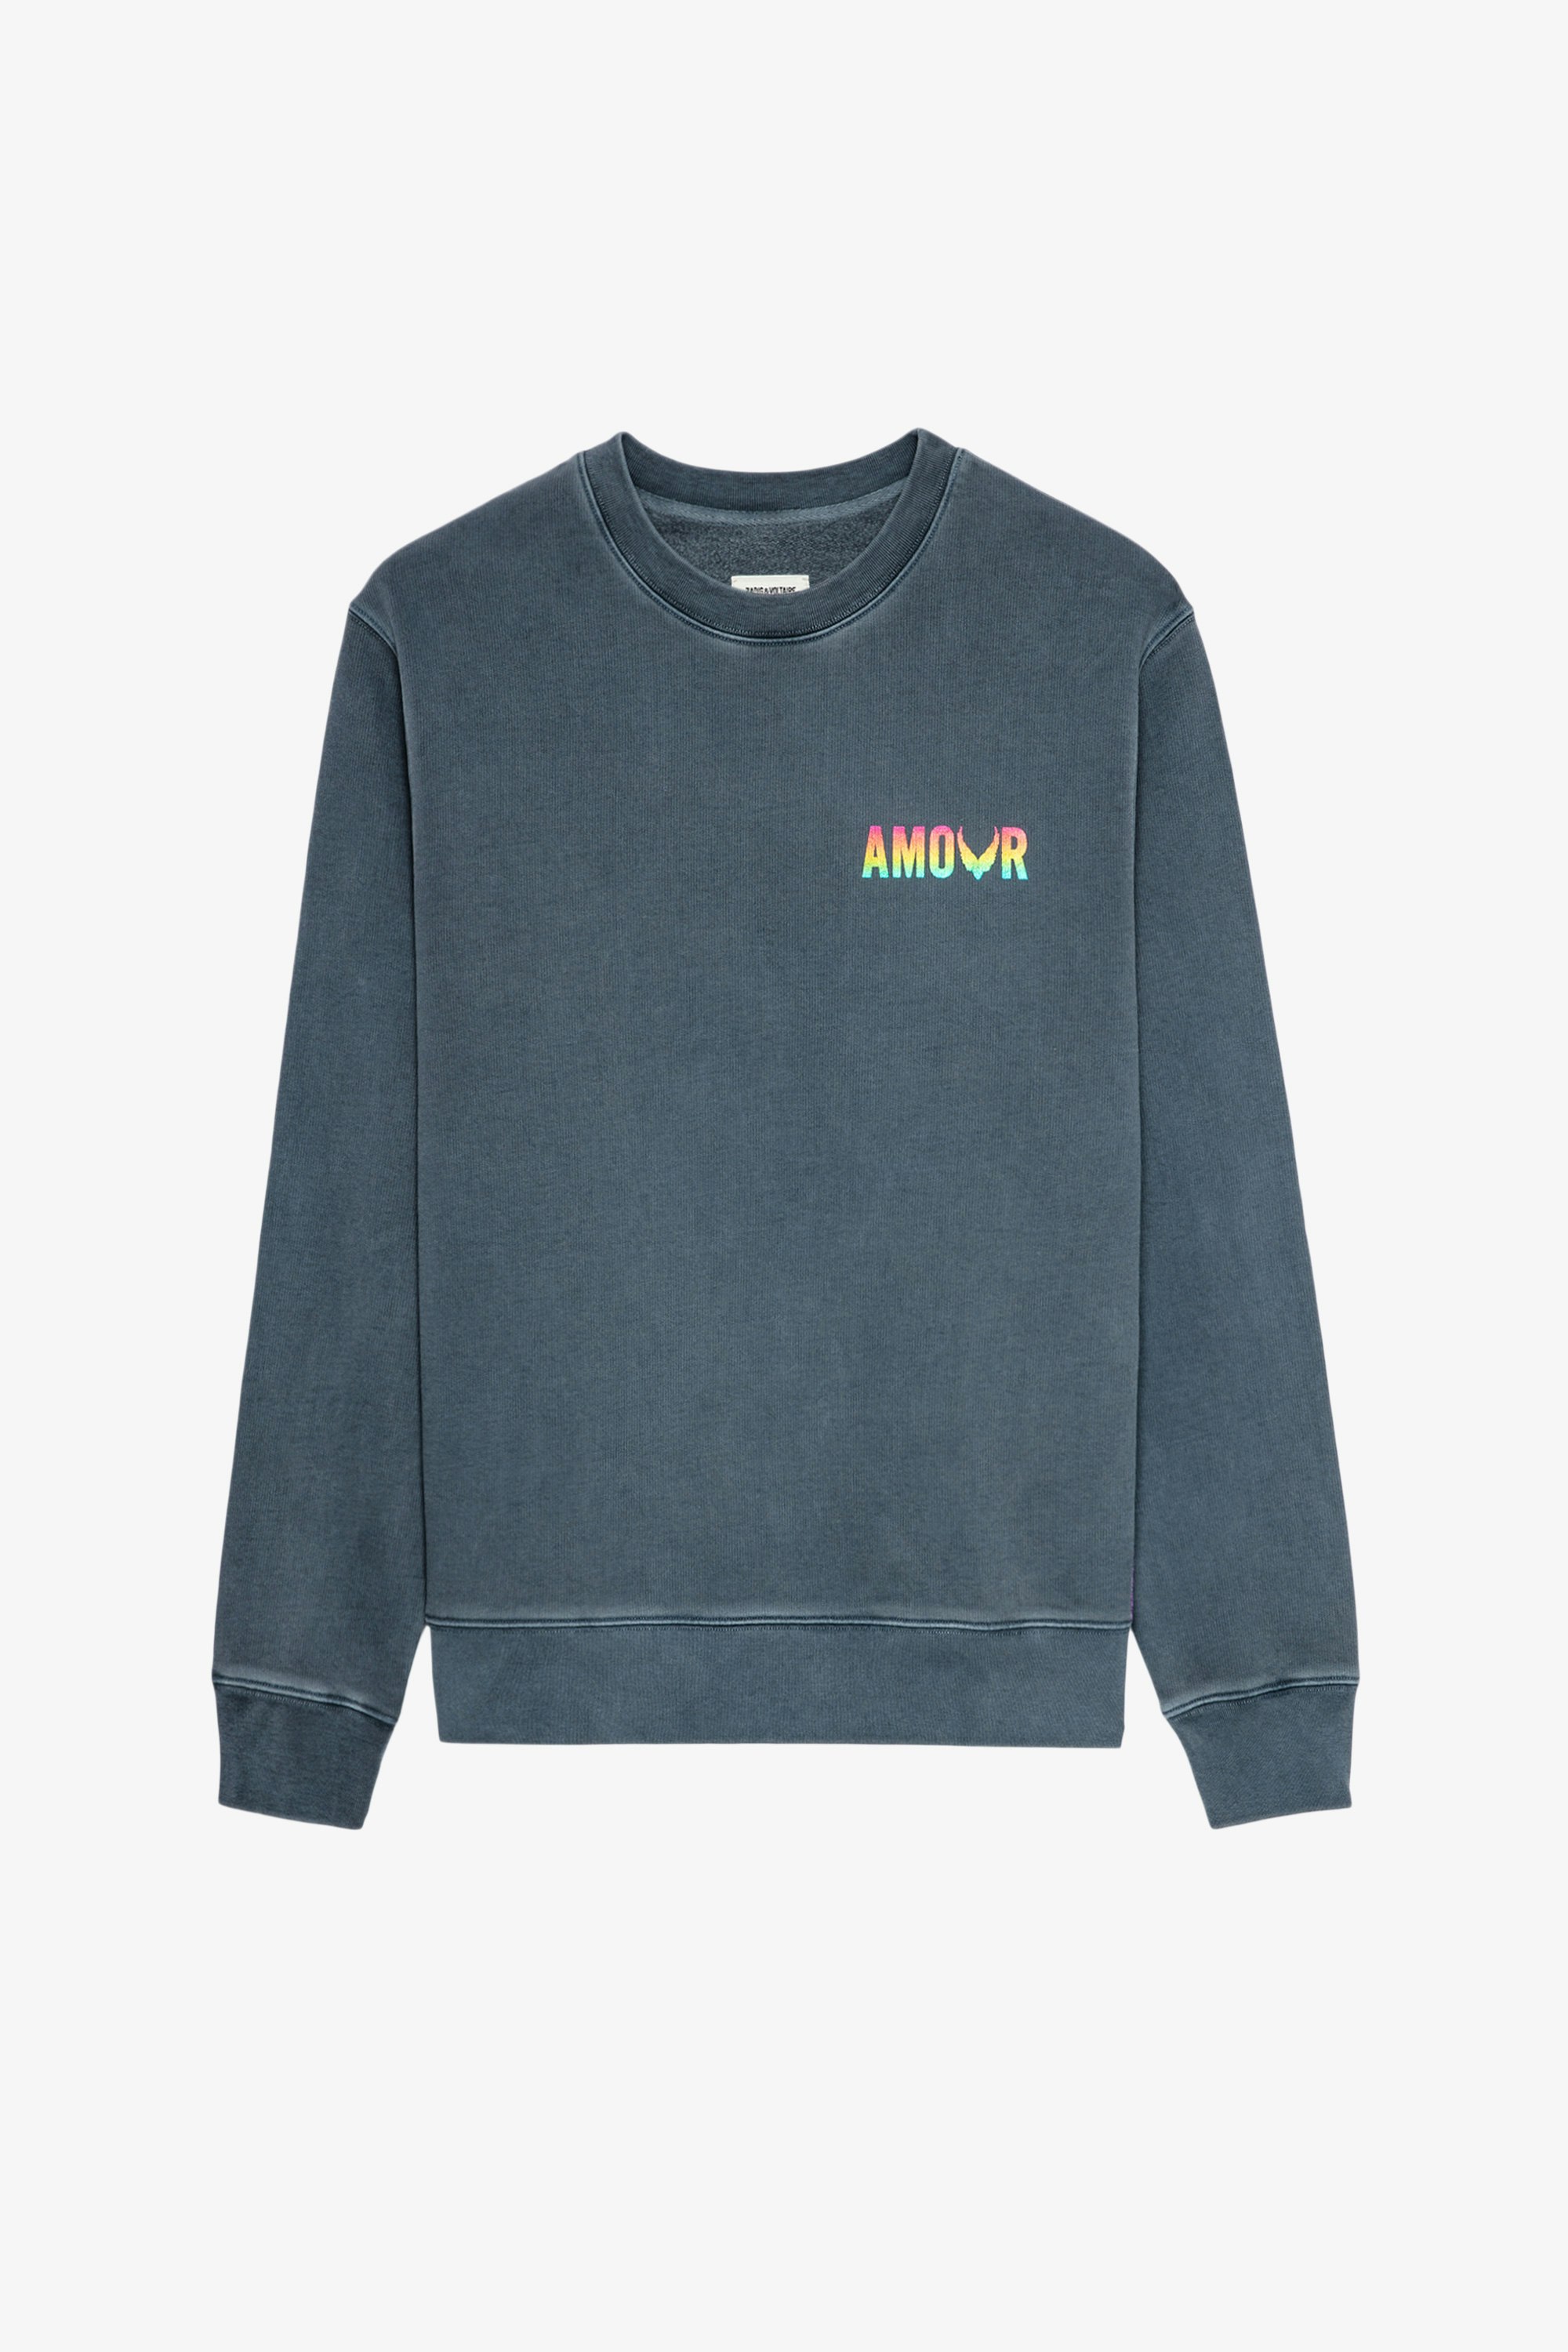 Simba Amour Wings スウェット Women’s navy blue cotton sweatshirt with multicoloured stripes and Amour print